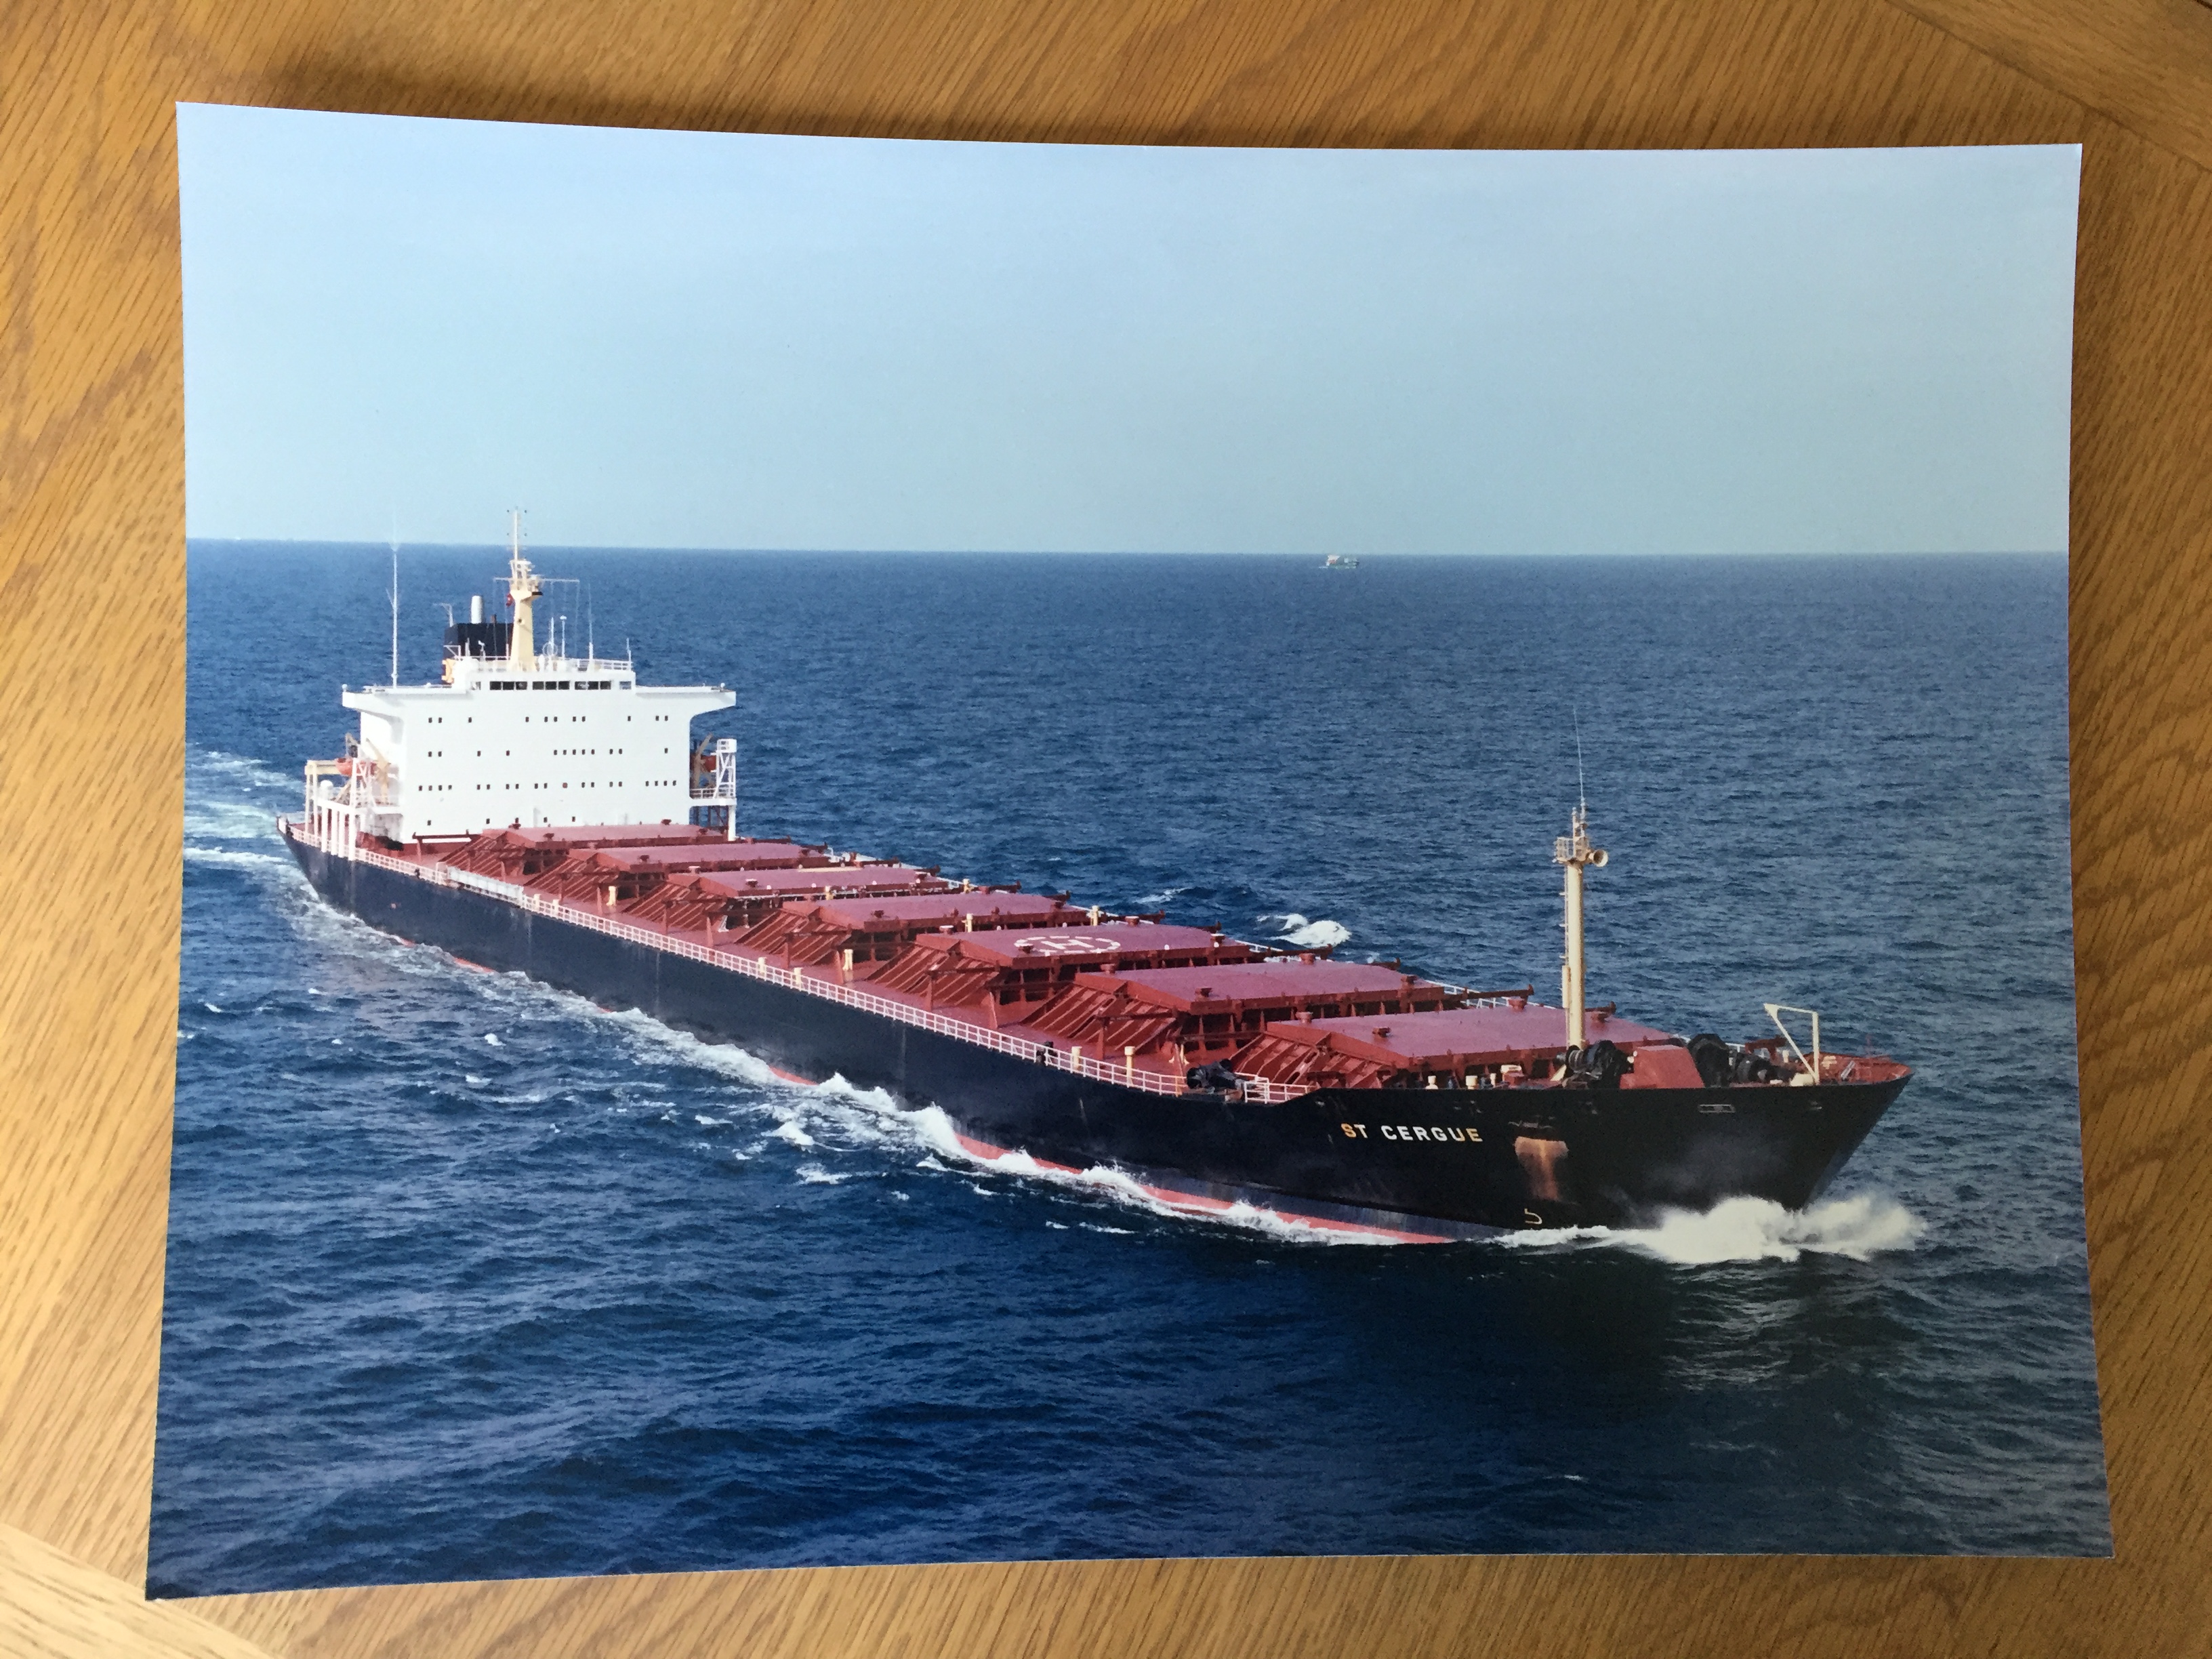 COLOUR PHOTOGRAPH FROM THE CONTAINER VESSEL THE ST. CERGUE